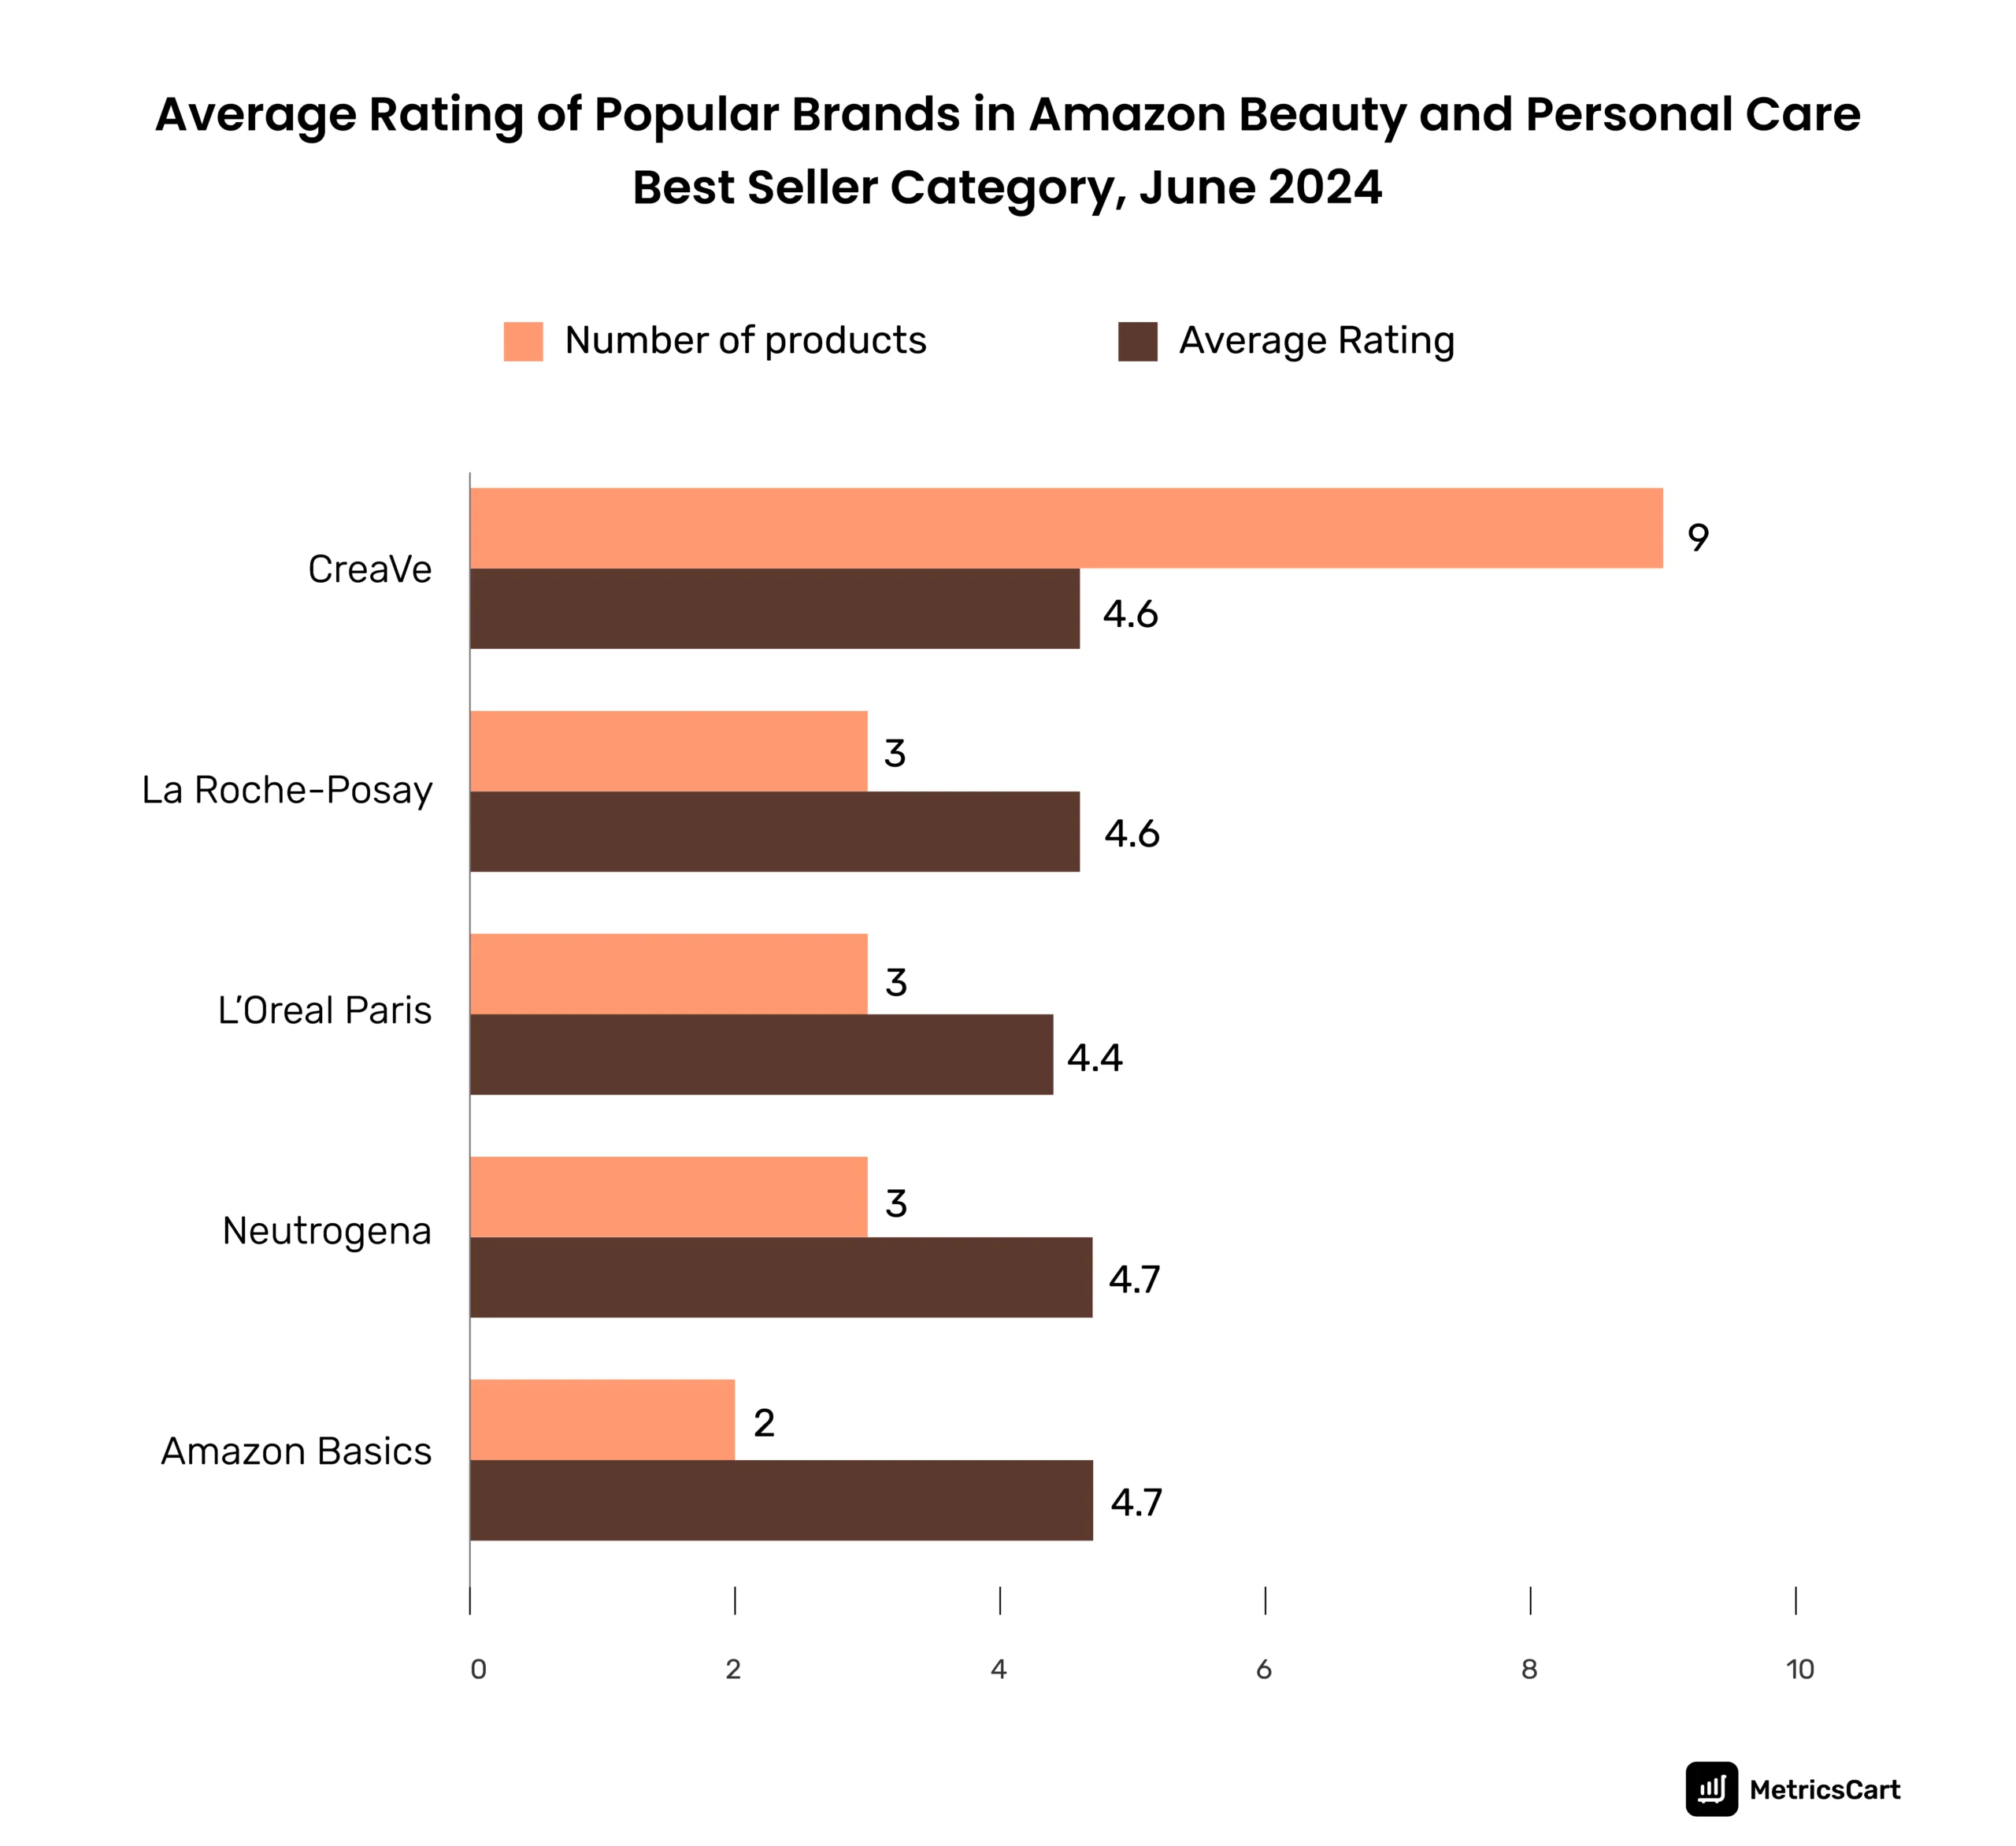 the average rating of the top-selling brands in the Amazon beauty and personal care category.